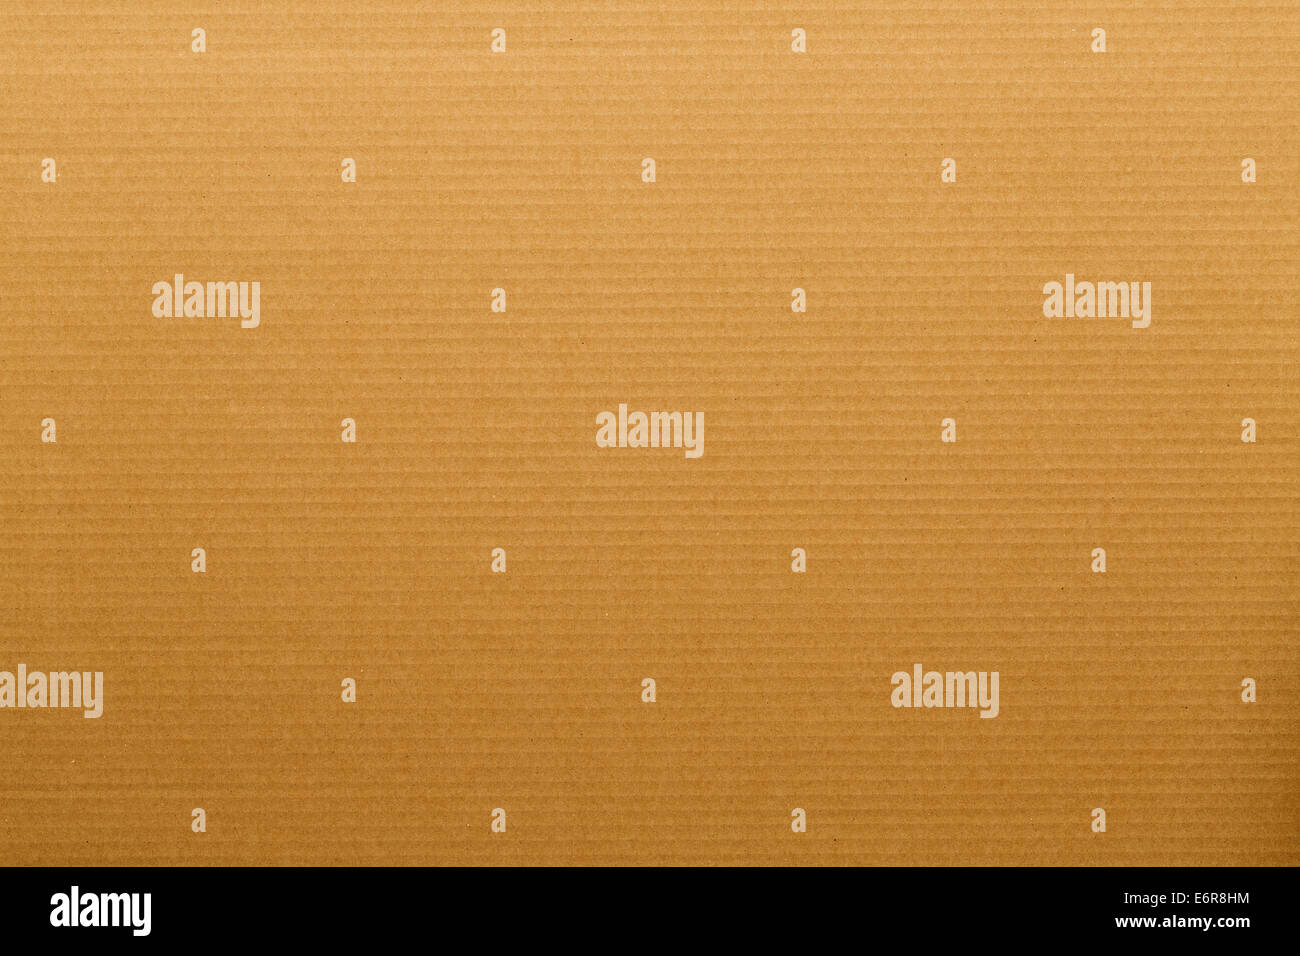 Cardboard surface with horizontal lines Stock Photo